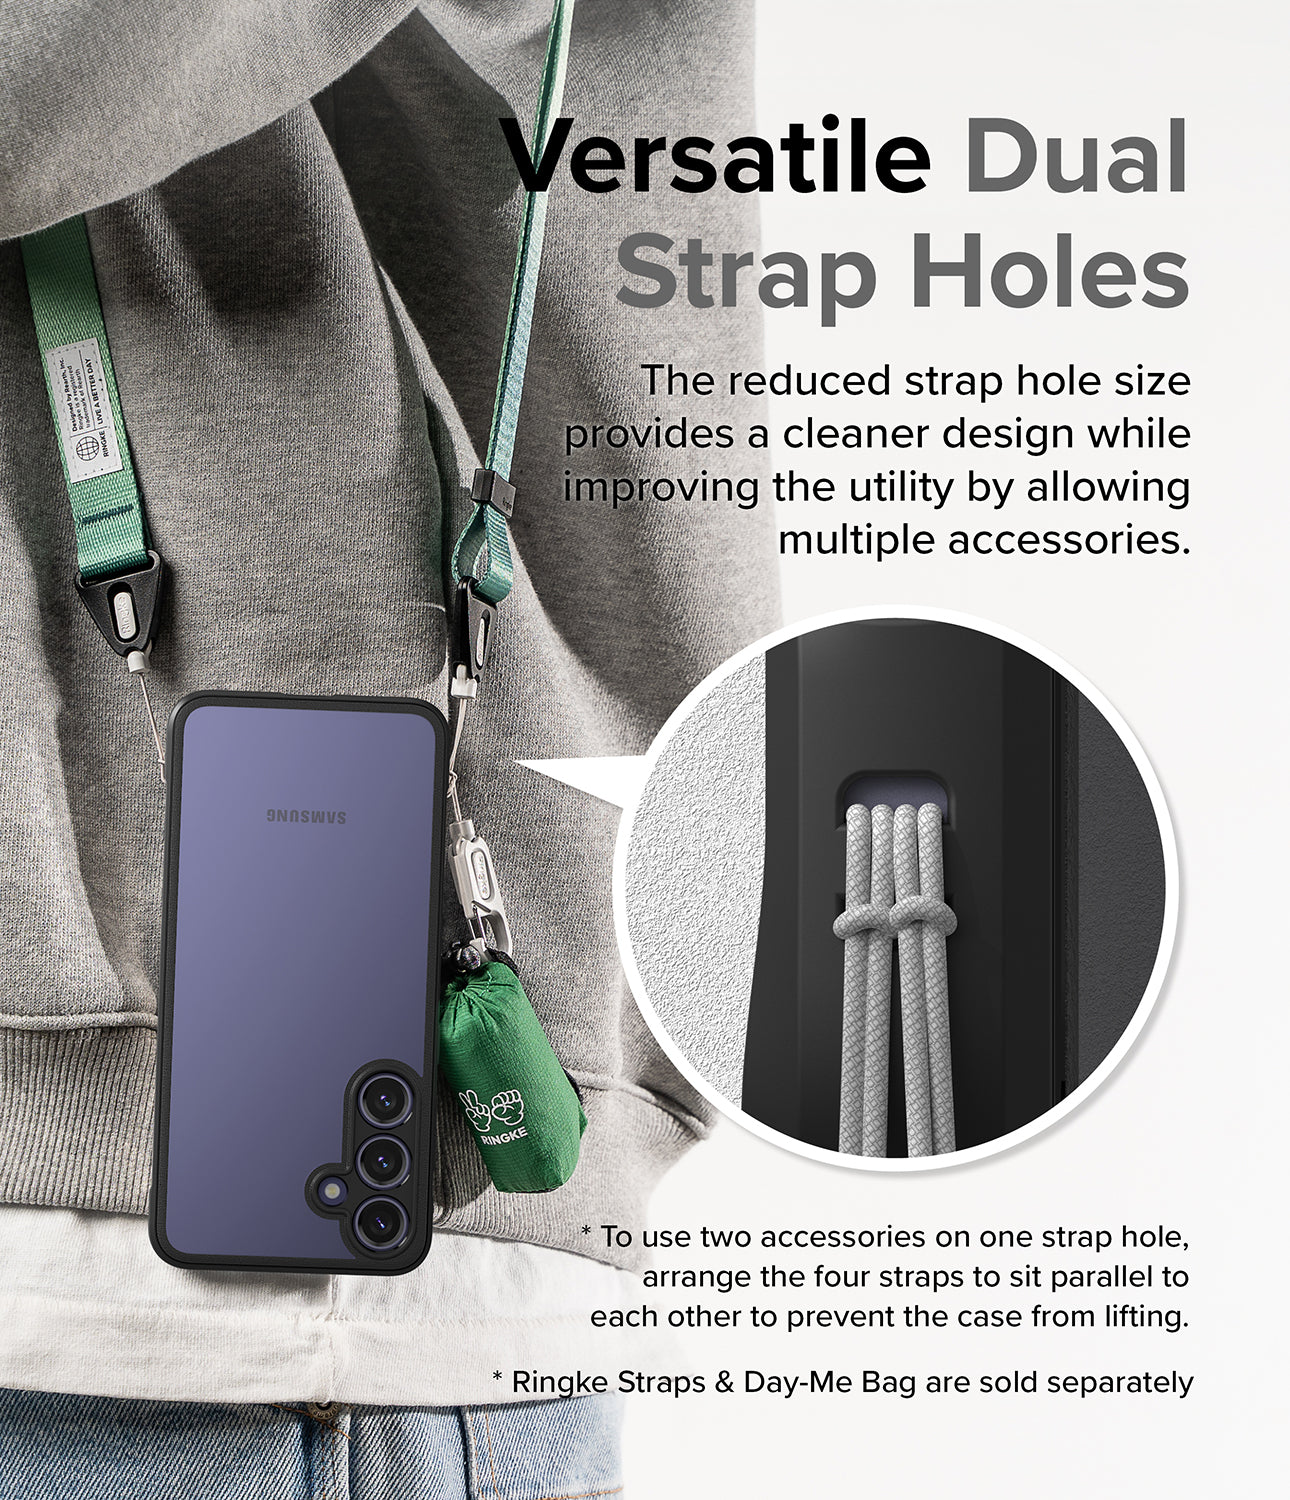 Galaxy S24 Plus Case | Fusion Bold - Versatile Dual Strap Holes. The reduced strap hole size provides a cleaner design while improving the utility by allowing multiple accessories.